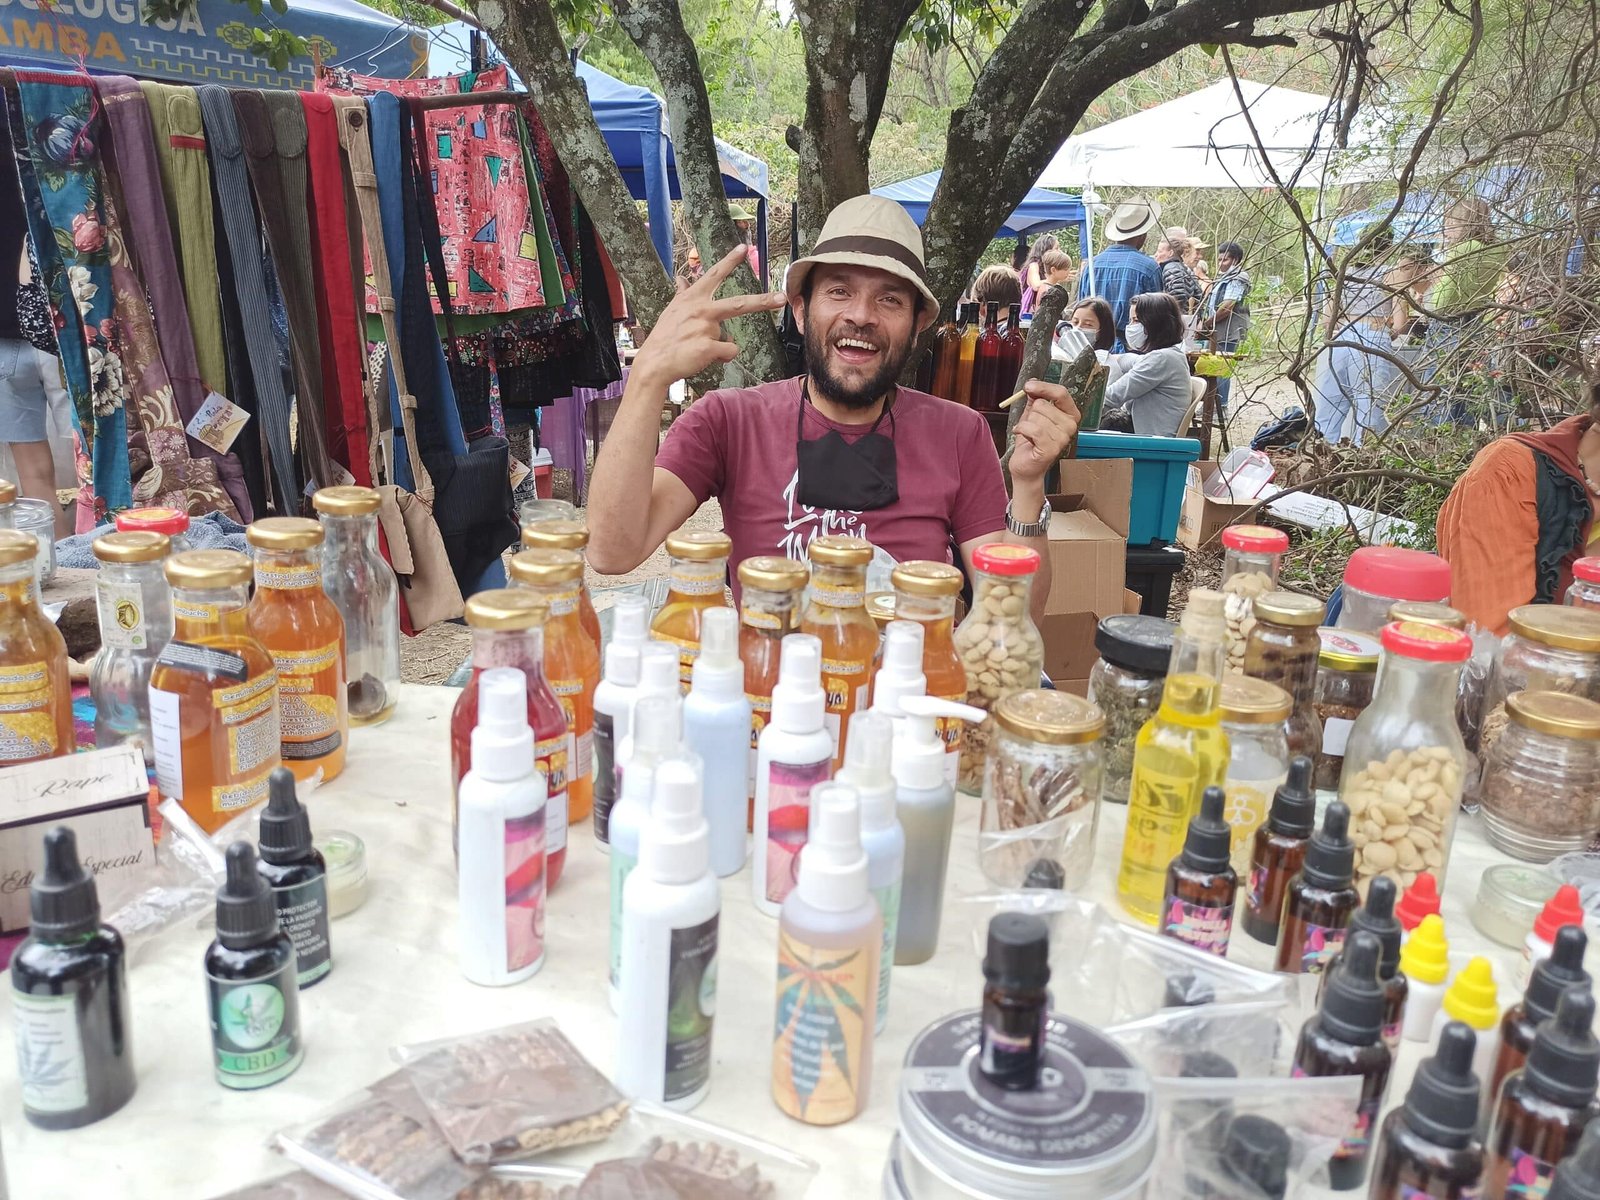 Fairs and open markets are spaces where fair trade is practiced throughout Ecuador.